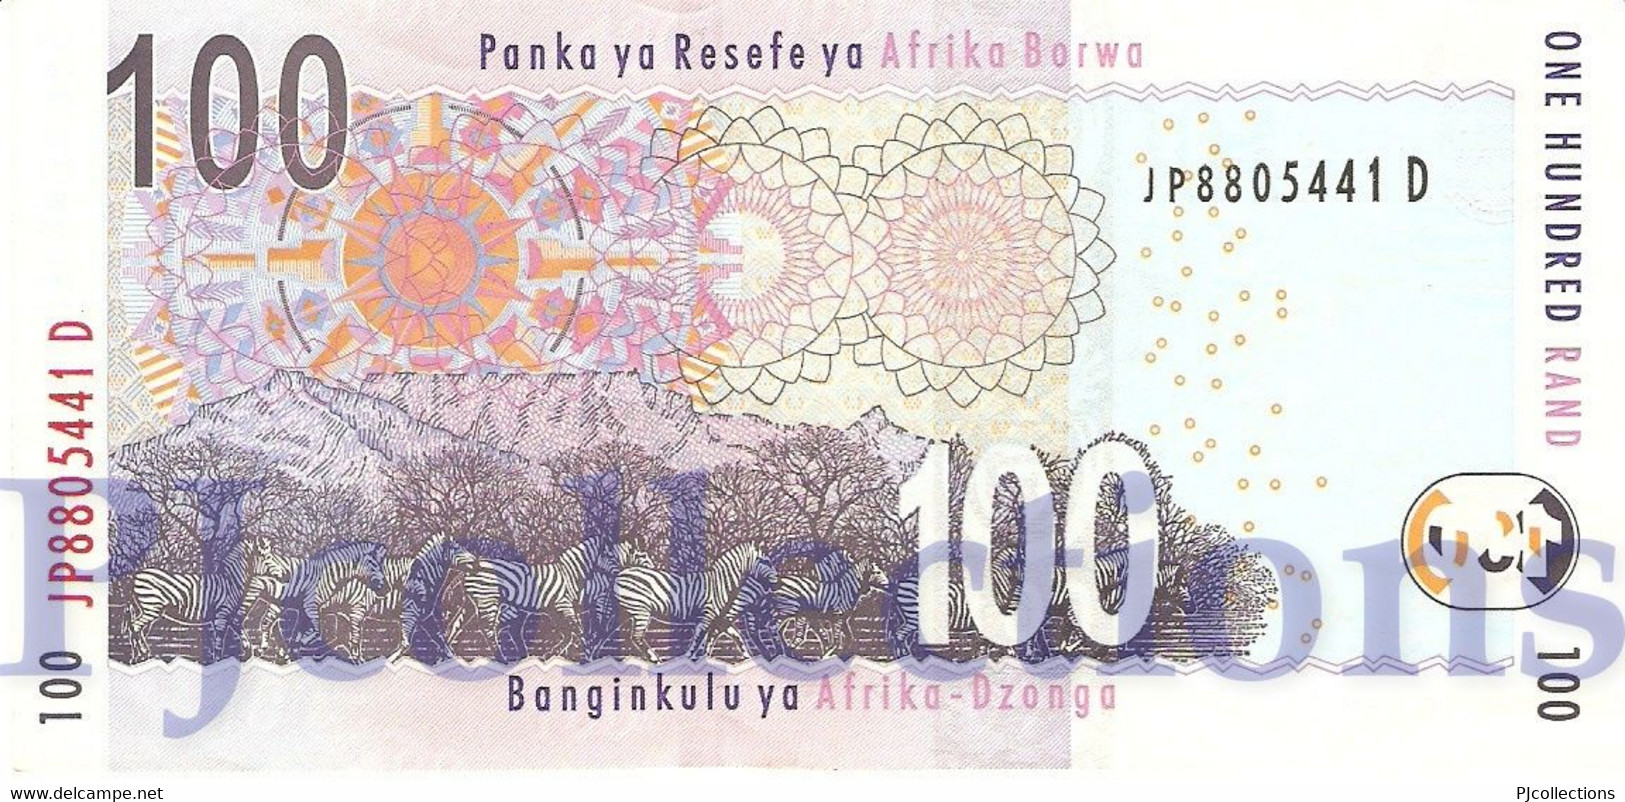 SOUTH AFRICA 100 RAND 2005 PICK 131a AU+ - South Africa